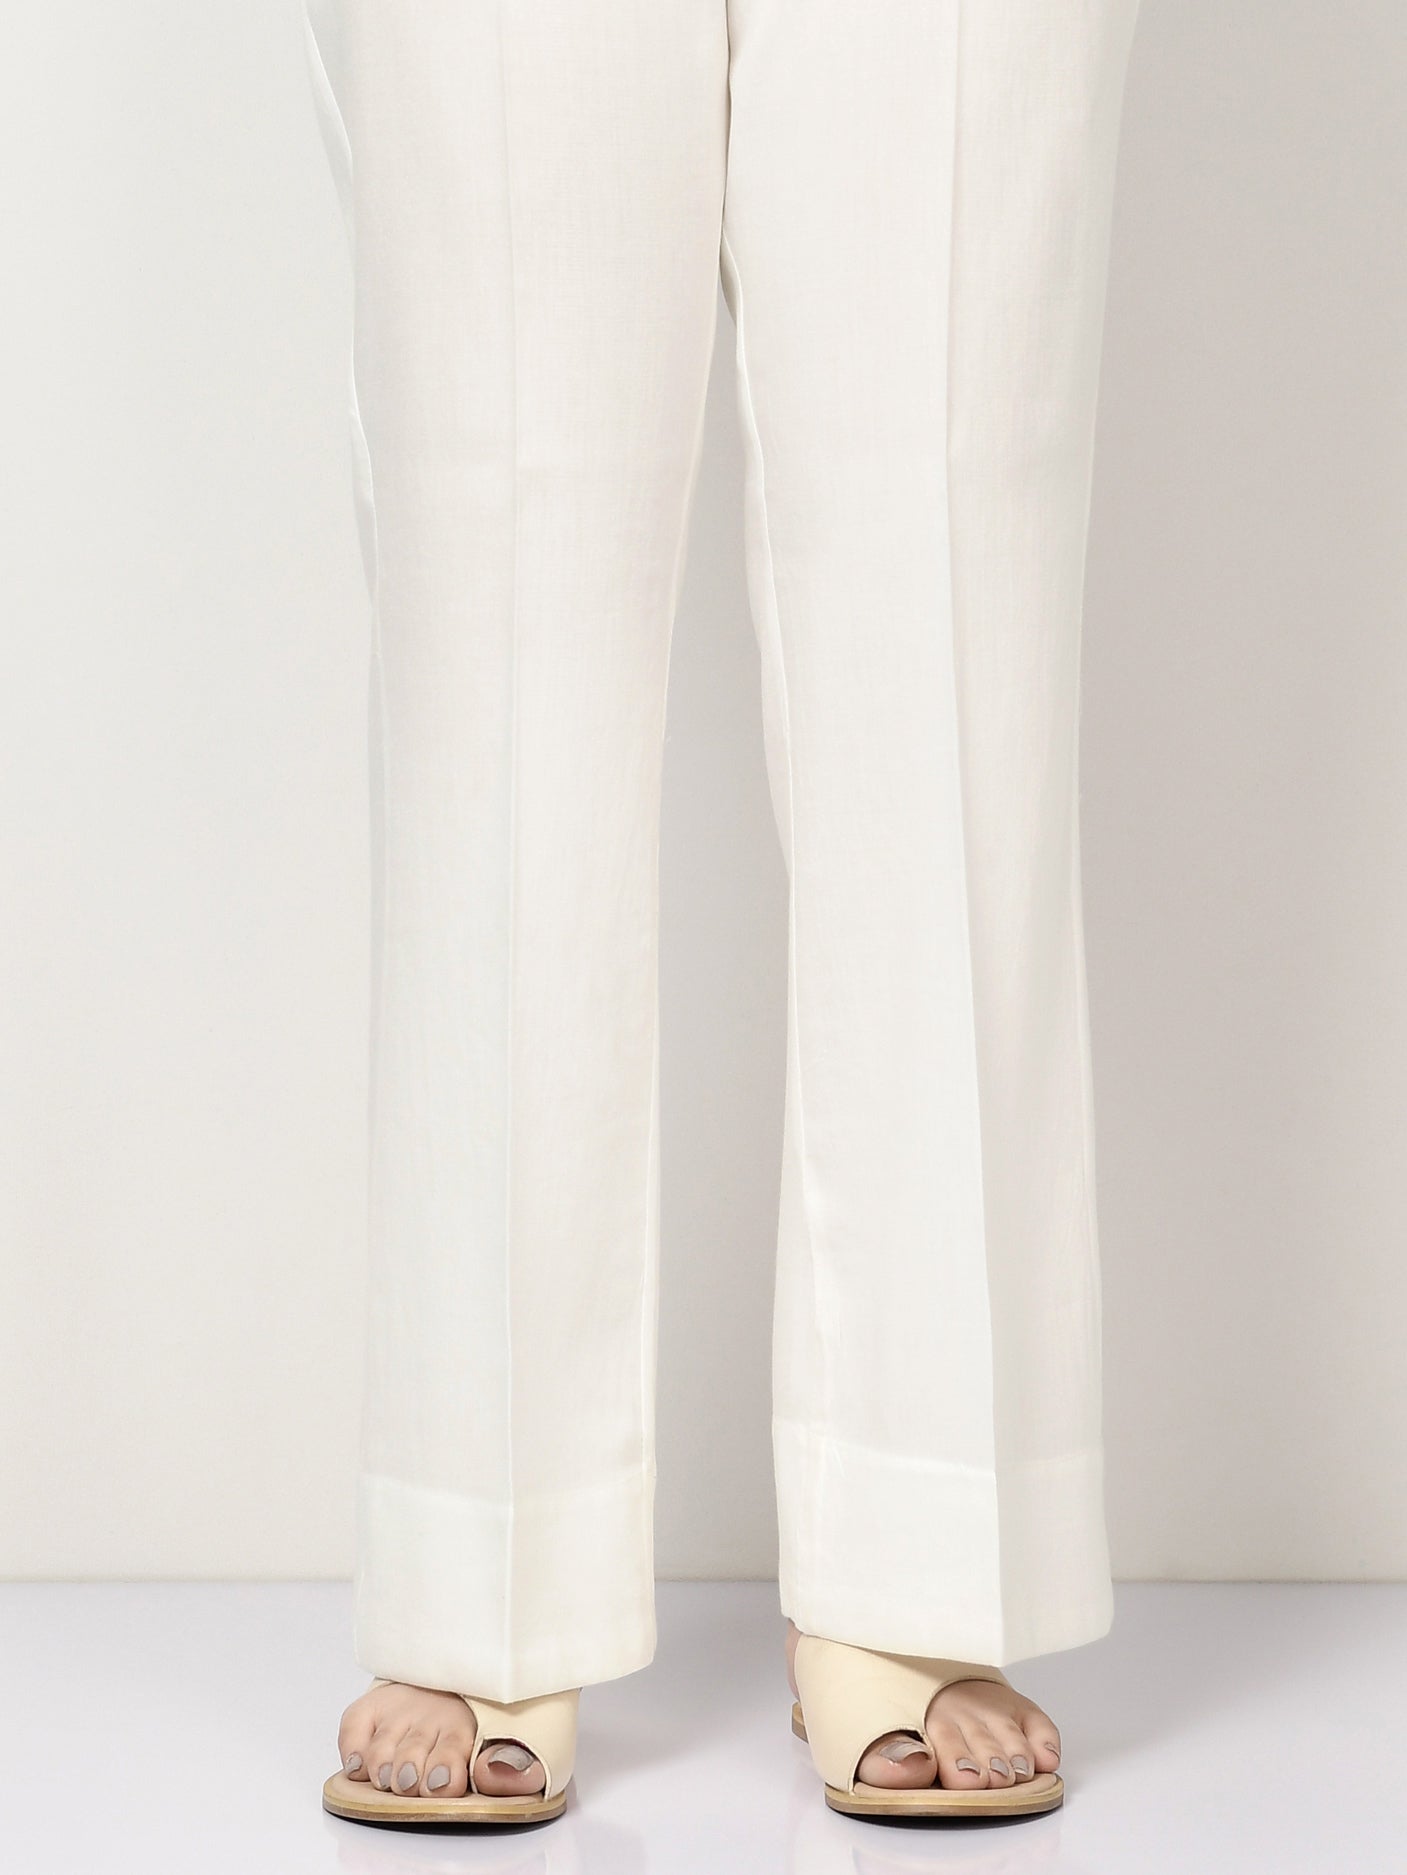 Khaddar Trouser-Dyed(Unstitched)